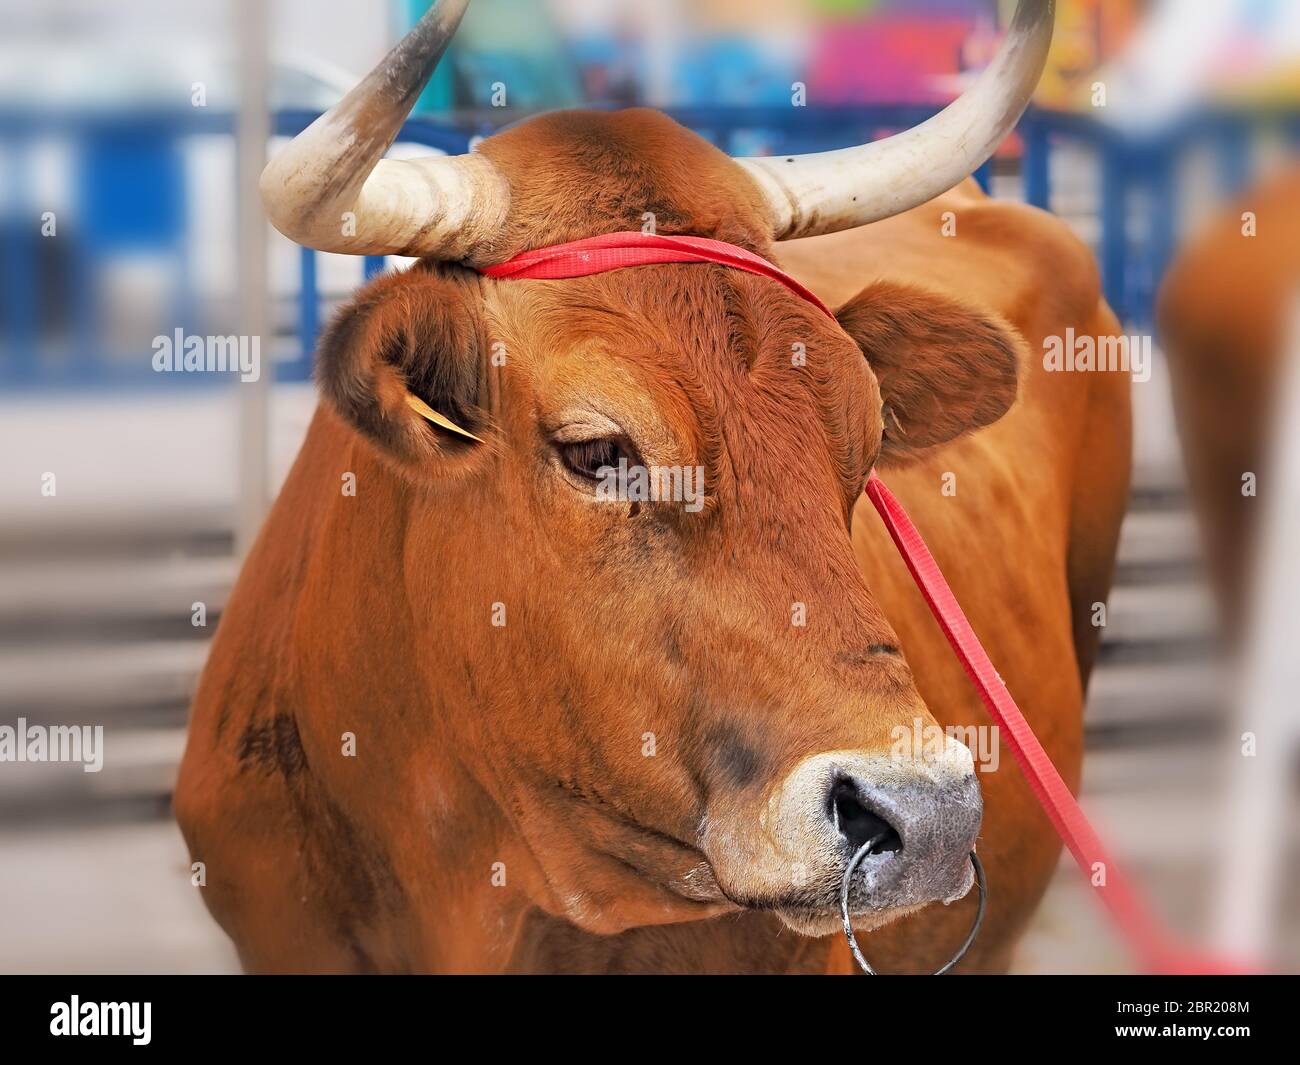 big brown bull, he has a ring in his nose and a red band around the horns.  He has brown fur, the horns are bent Stock Photo - Alamy